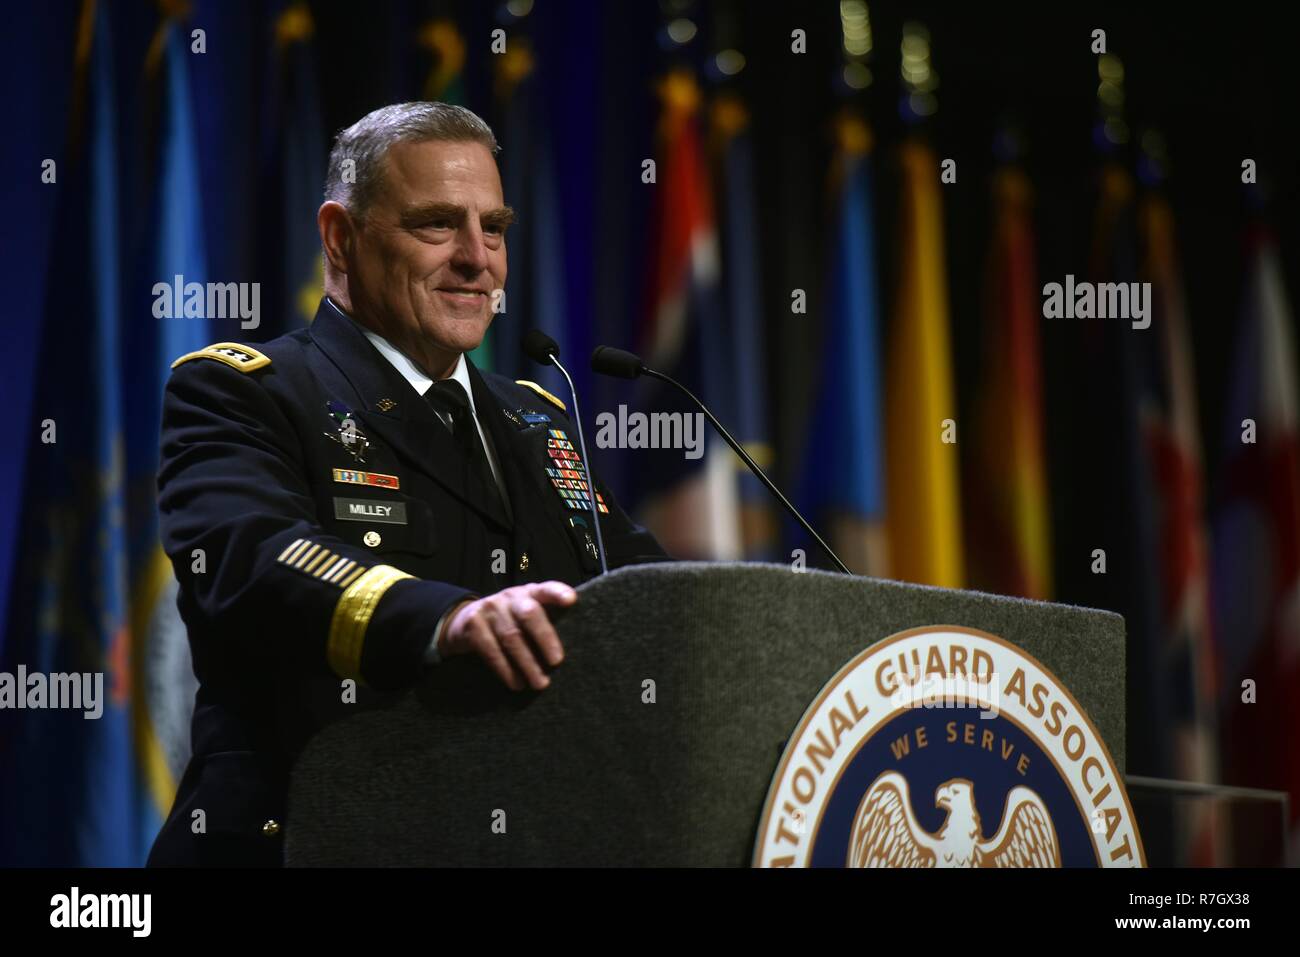 U.S. Army Chief of Staff Gen. Mark Milley delivers remarks to the National Guard Association of the United States 140th General Conference August 25, 2018 in New Orleans, Louisiana. Milley was chosen by President Donald Trump on December 8, 2018 to be the next Chairman of the Joint Chiefs. Stock Photo